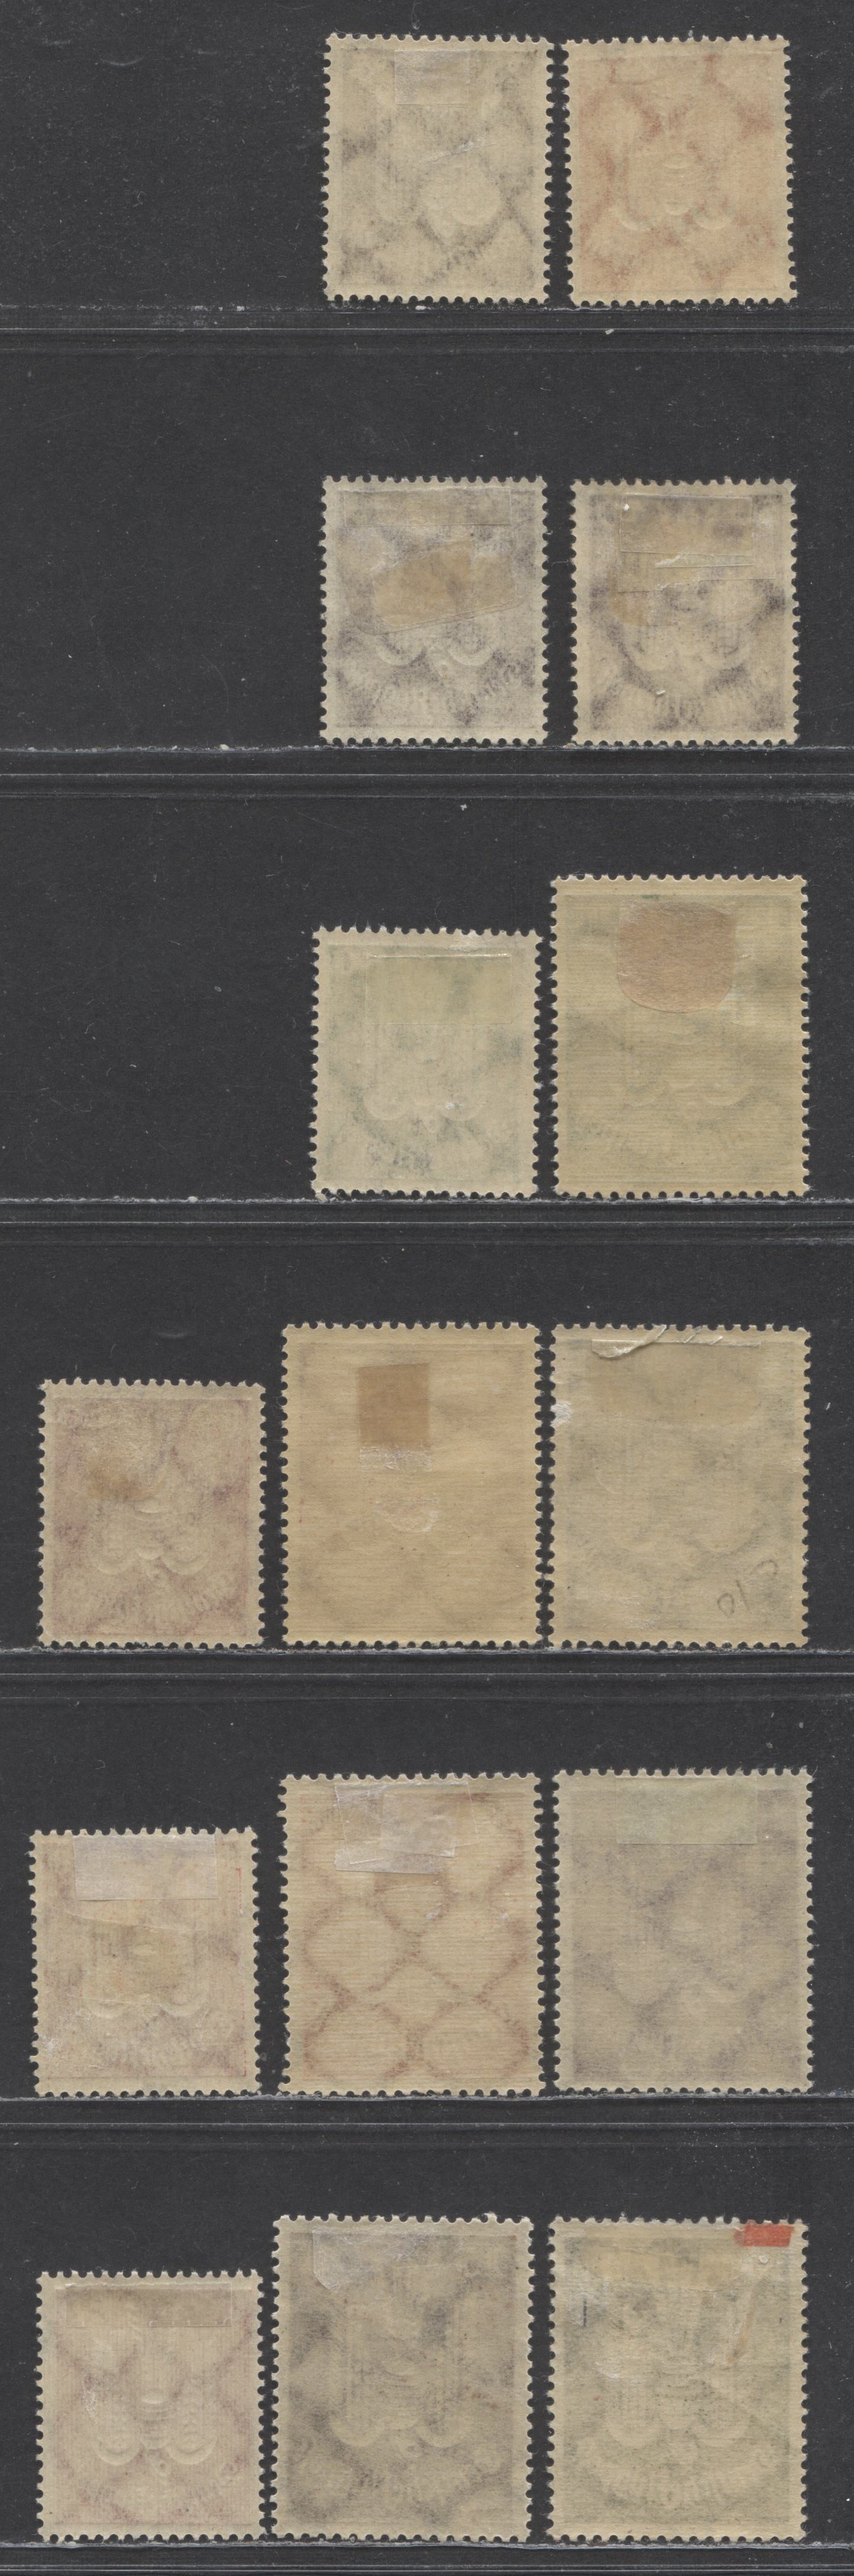 Lot 97 Germany SC#C3-C14(MI#210-218, 235-237) 1922-1923 Airmail Issue, Set On Medium Paper With Extra Shades Of The 50pf And 60pf, 15 VFOG Singles, Click on Listing to See ALL Pictures, Estimated Value $5 USD